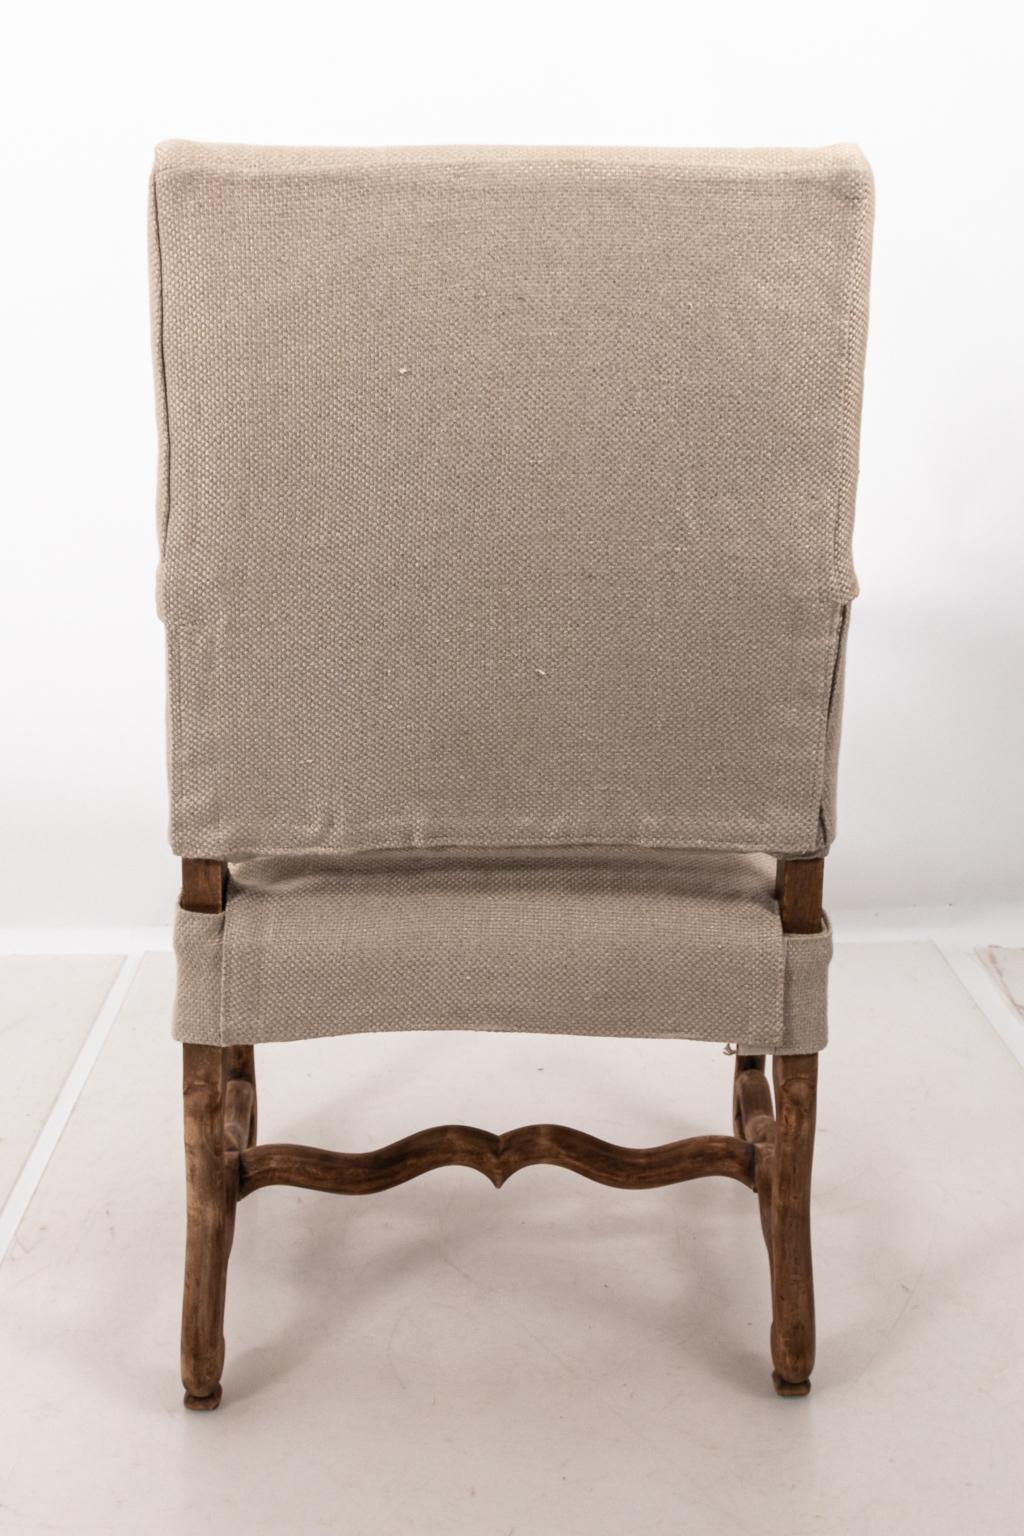 French Style Os De Mouton Armchair In Good Condition For Sale In Stamford, CT